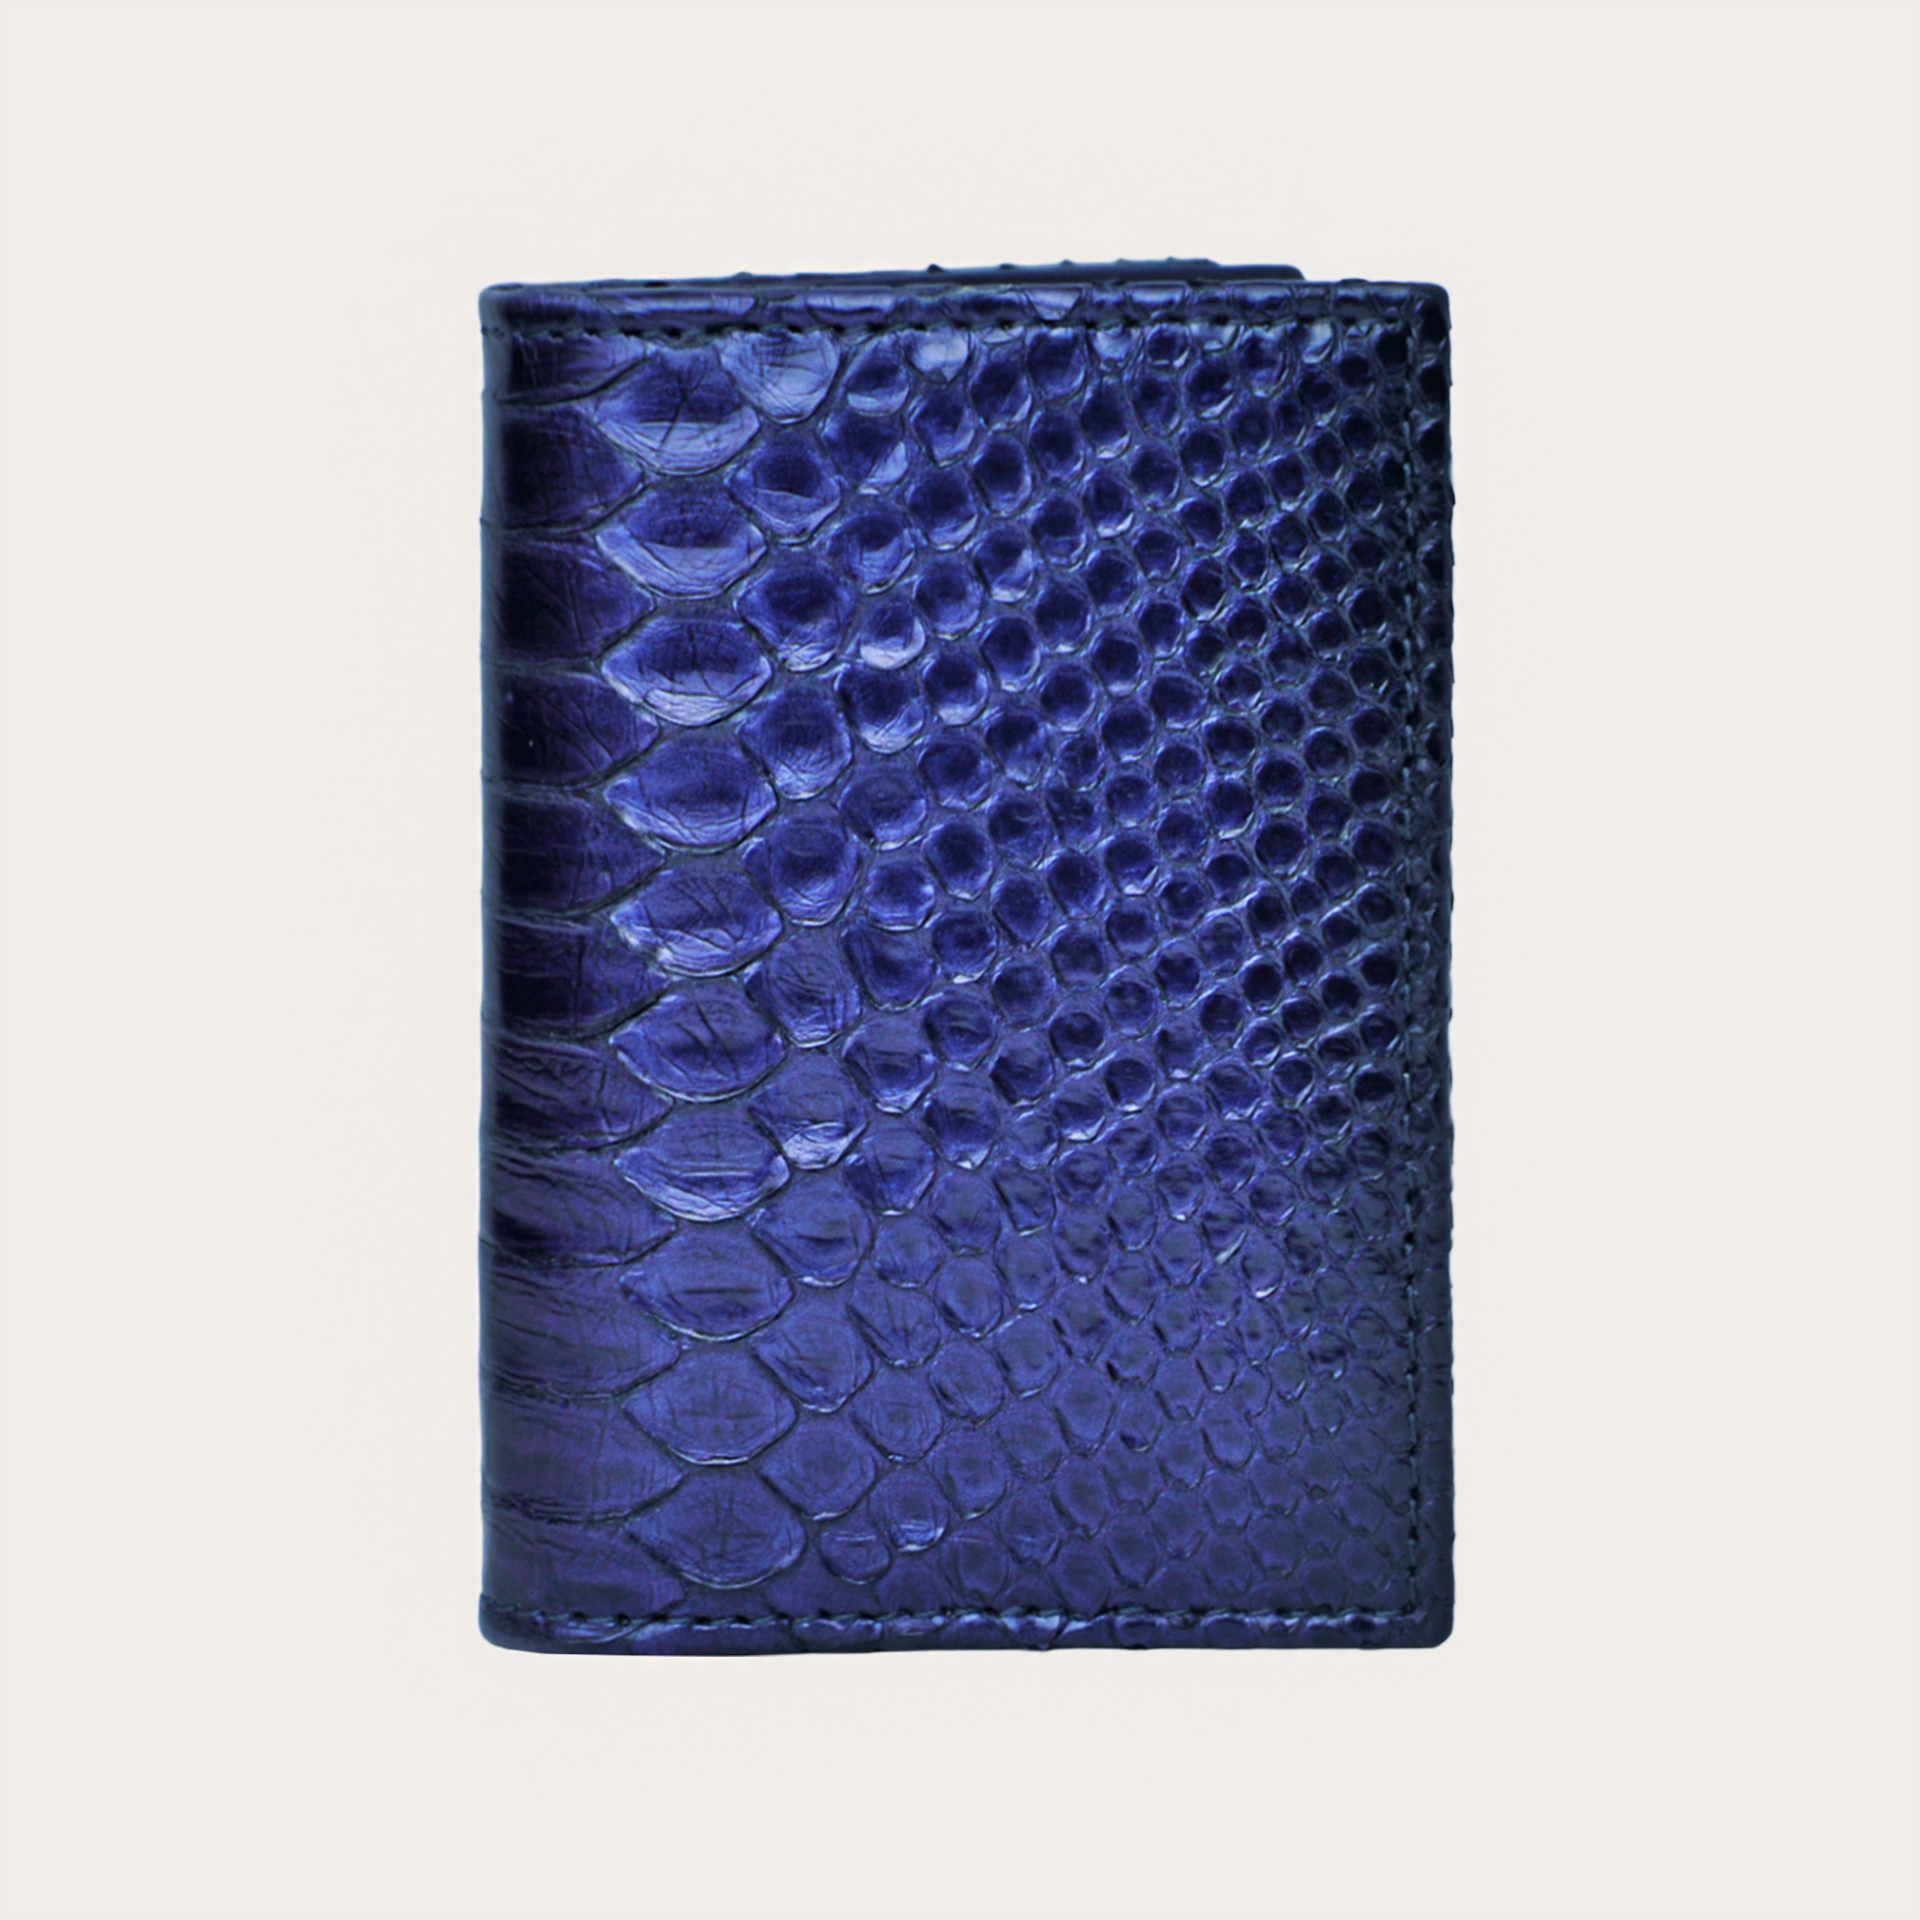 BRUCLE Credit card holder in python leather, black shaded blue